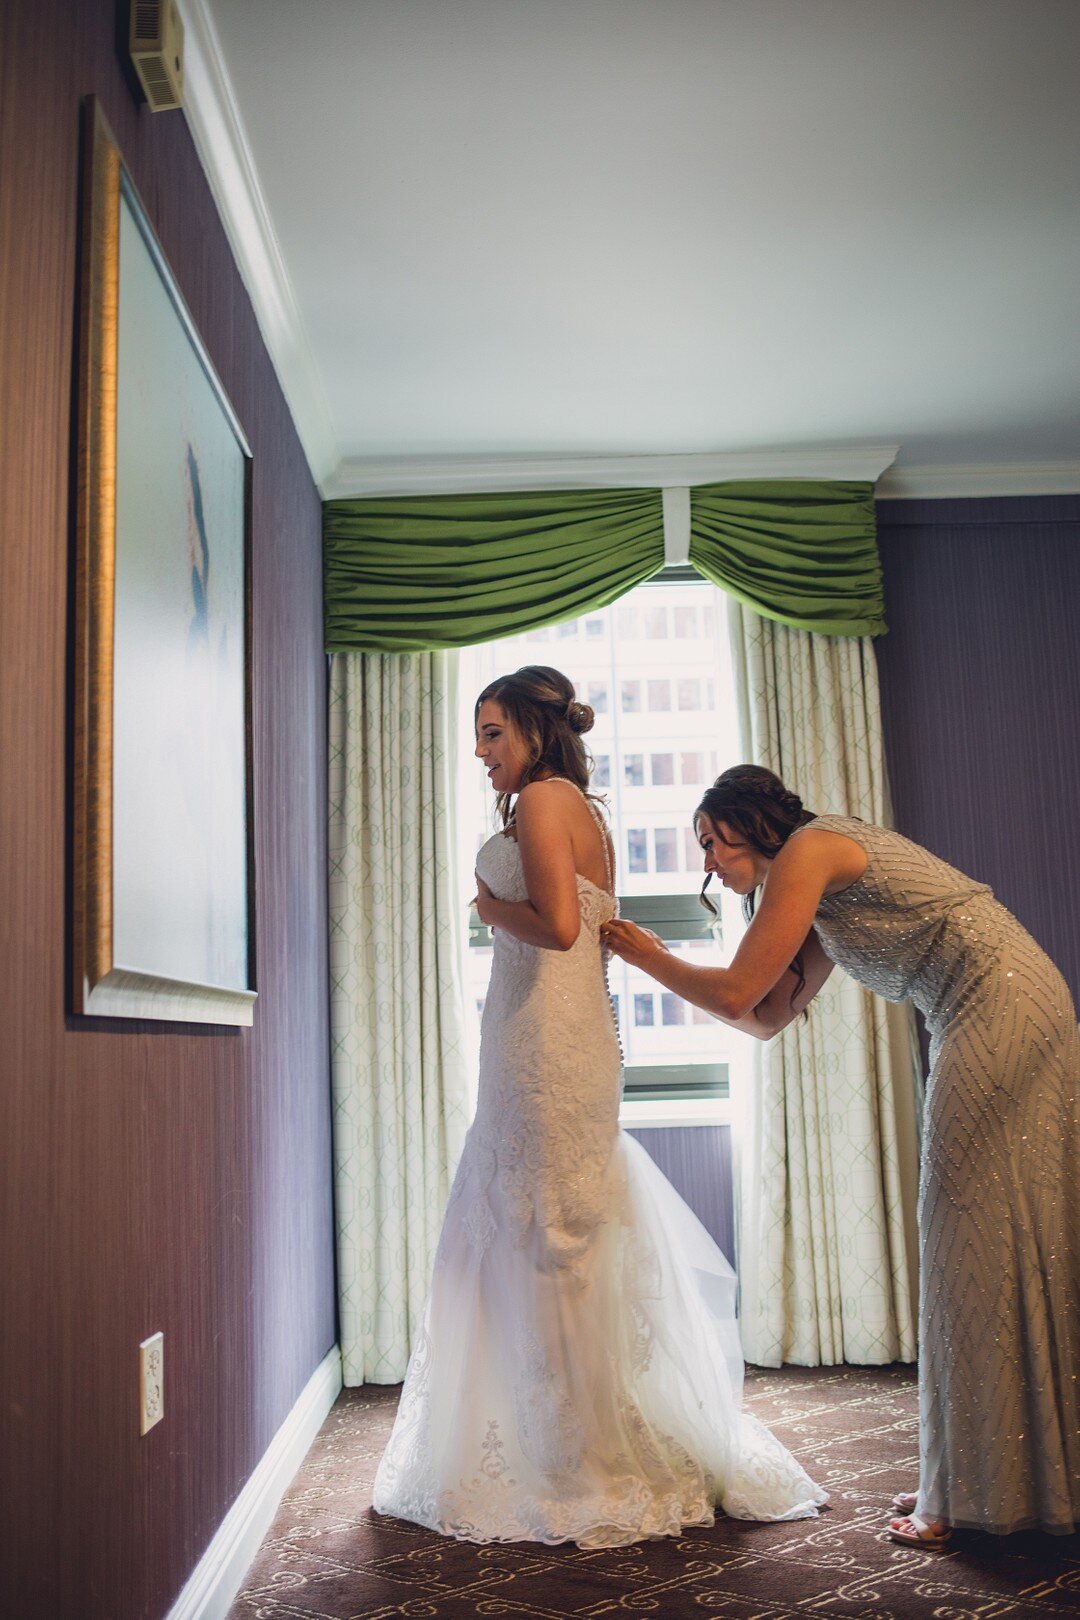 Chic Elemental Chicago Wedding captured by Cinder and Vin Photography. See more unique wedding ideas at CHItheeWED.com!